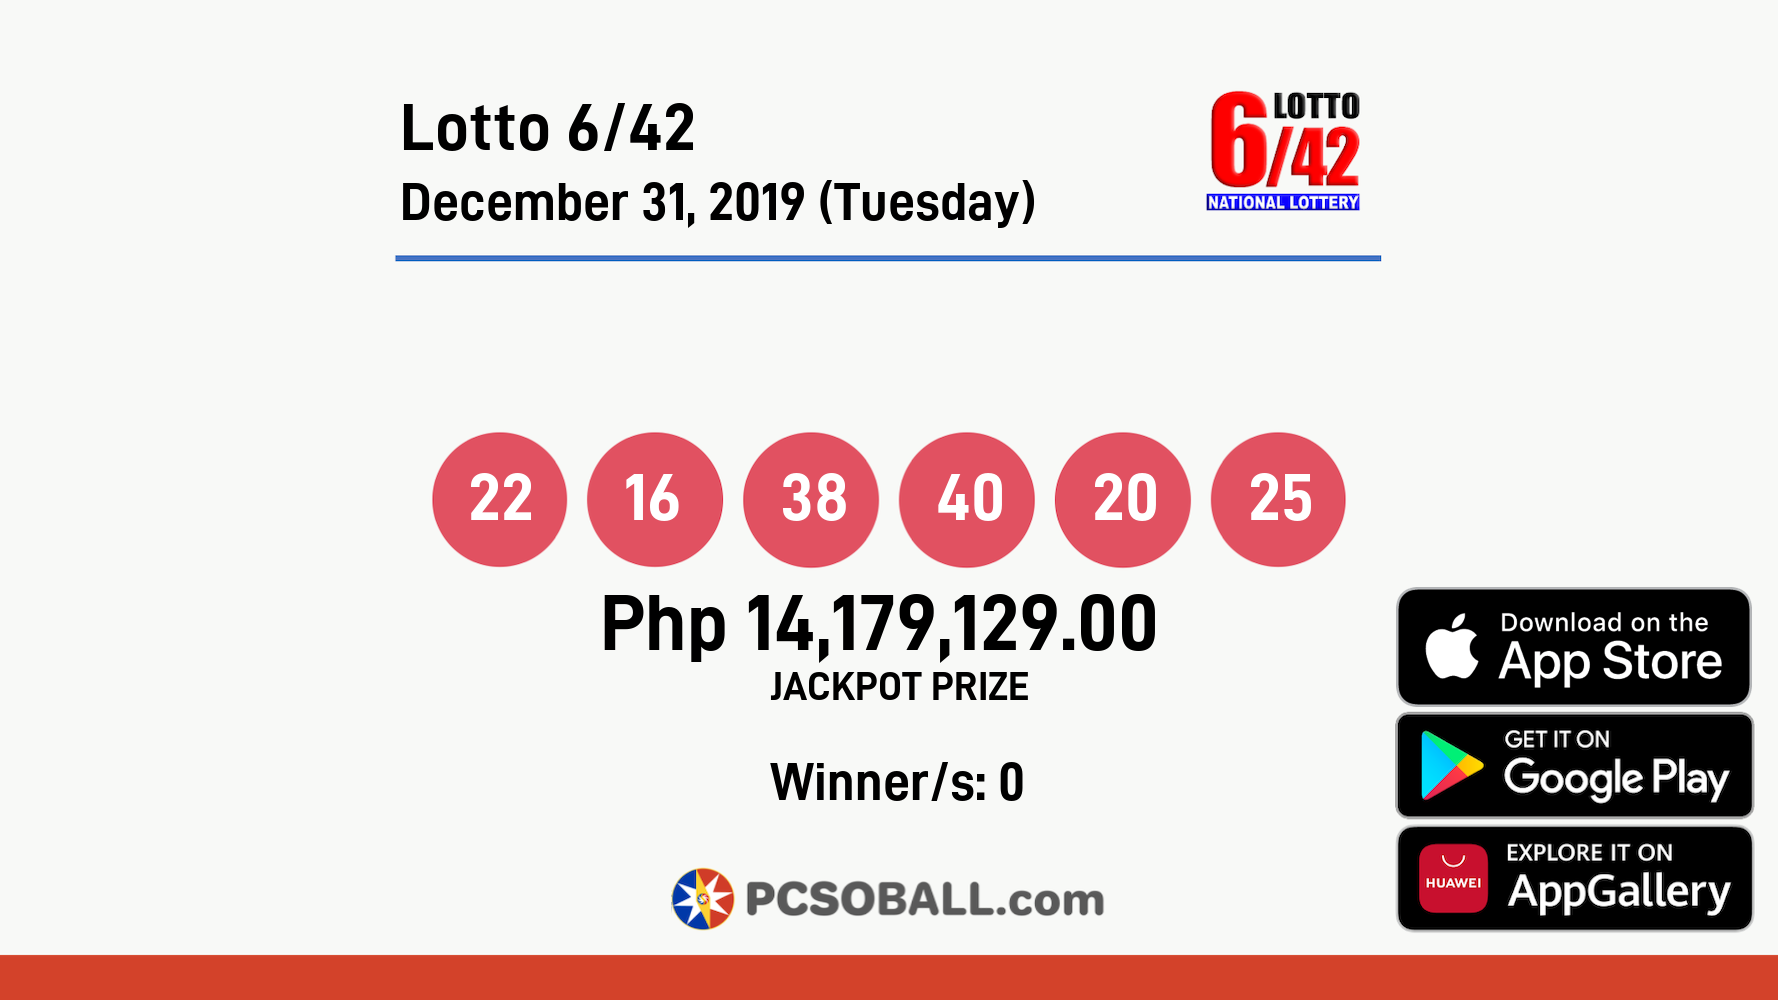 Lotto 6/42 December 31, 2019 (Tuesday) Result